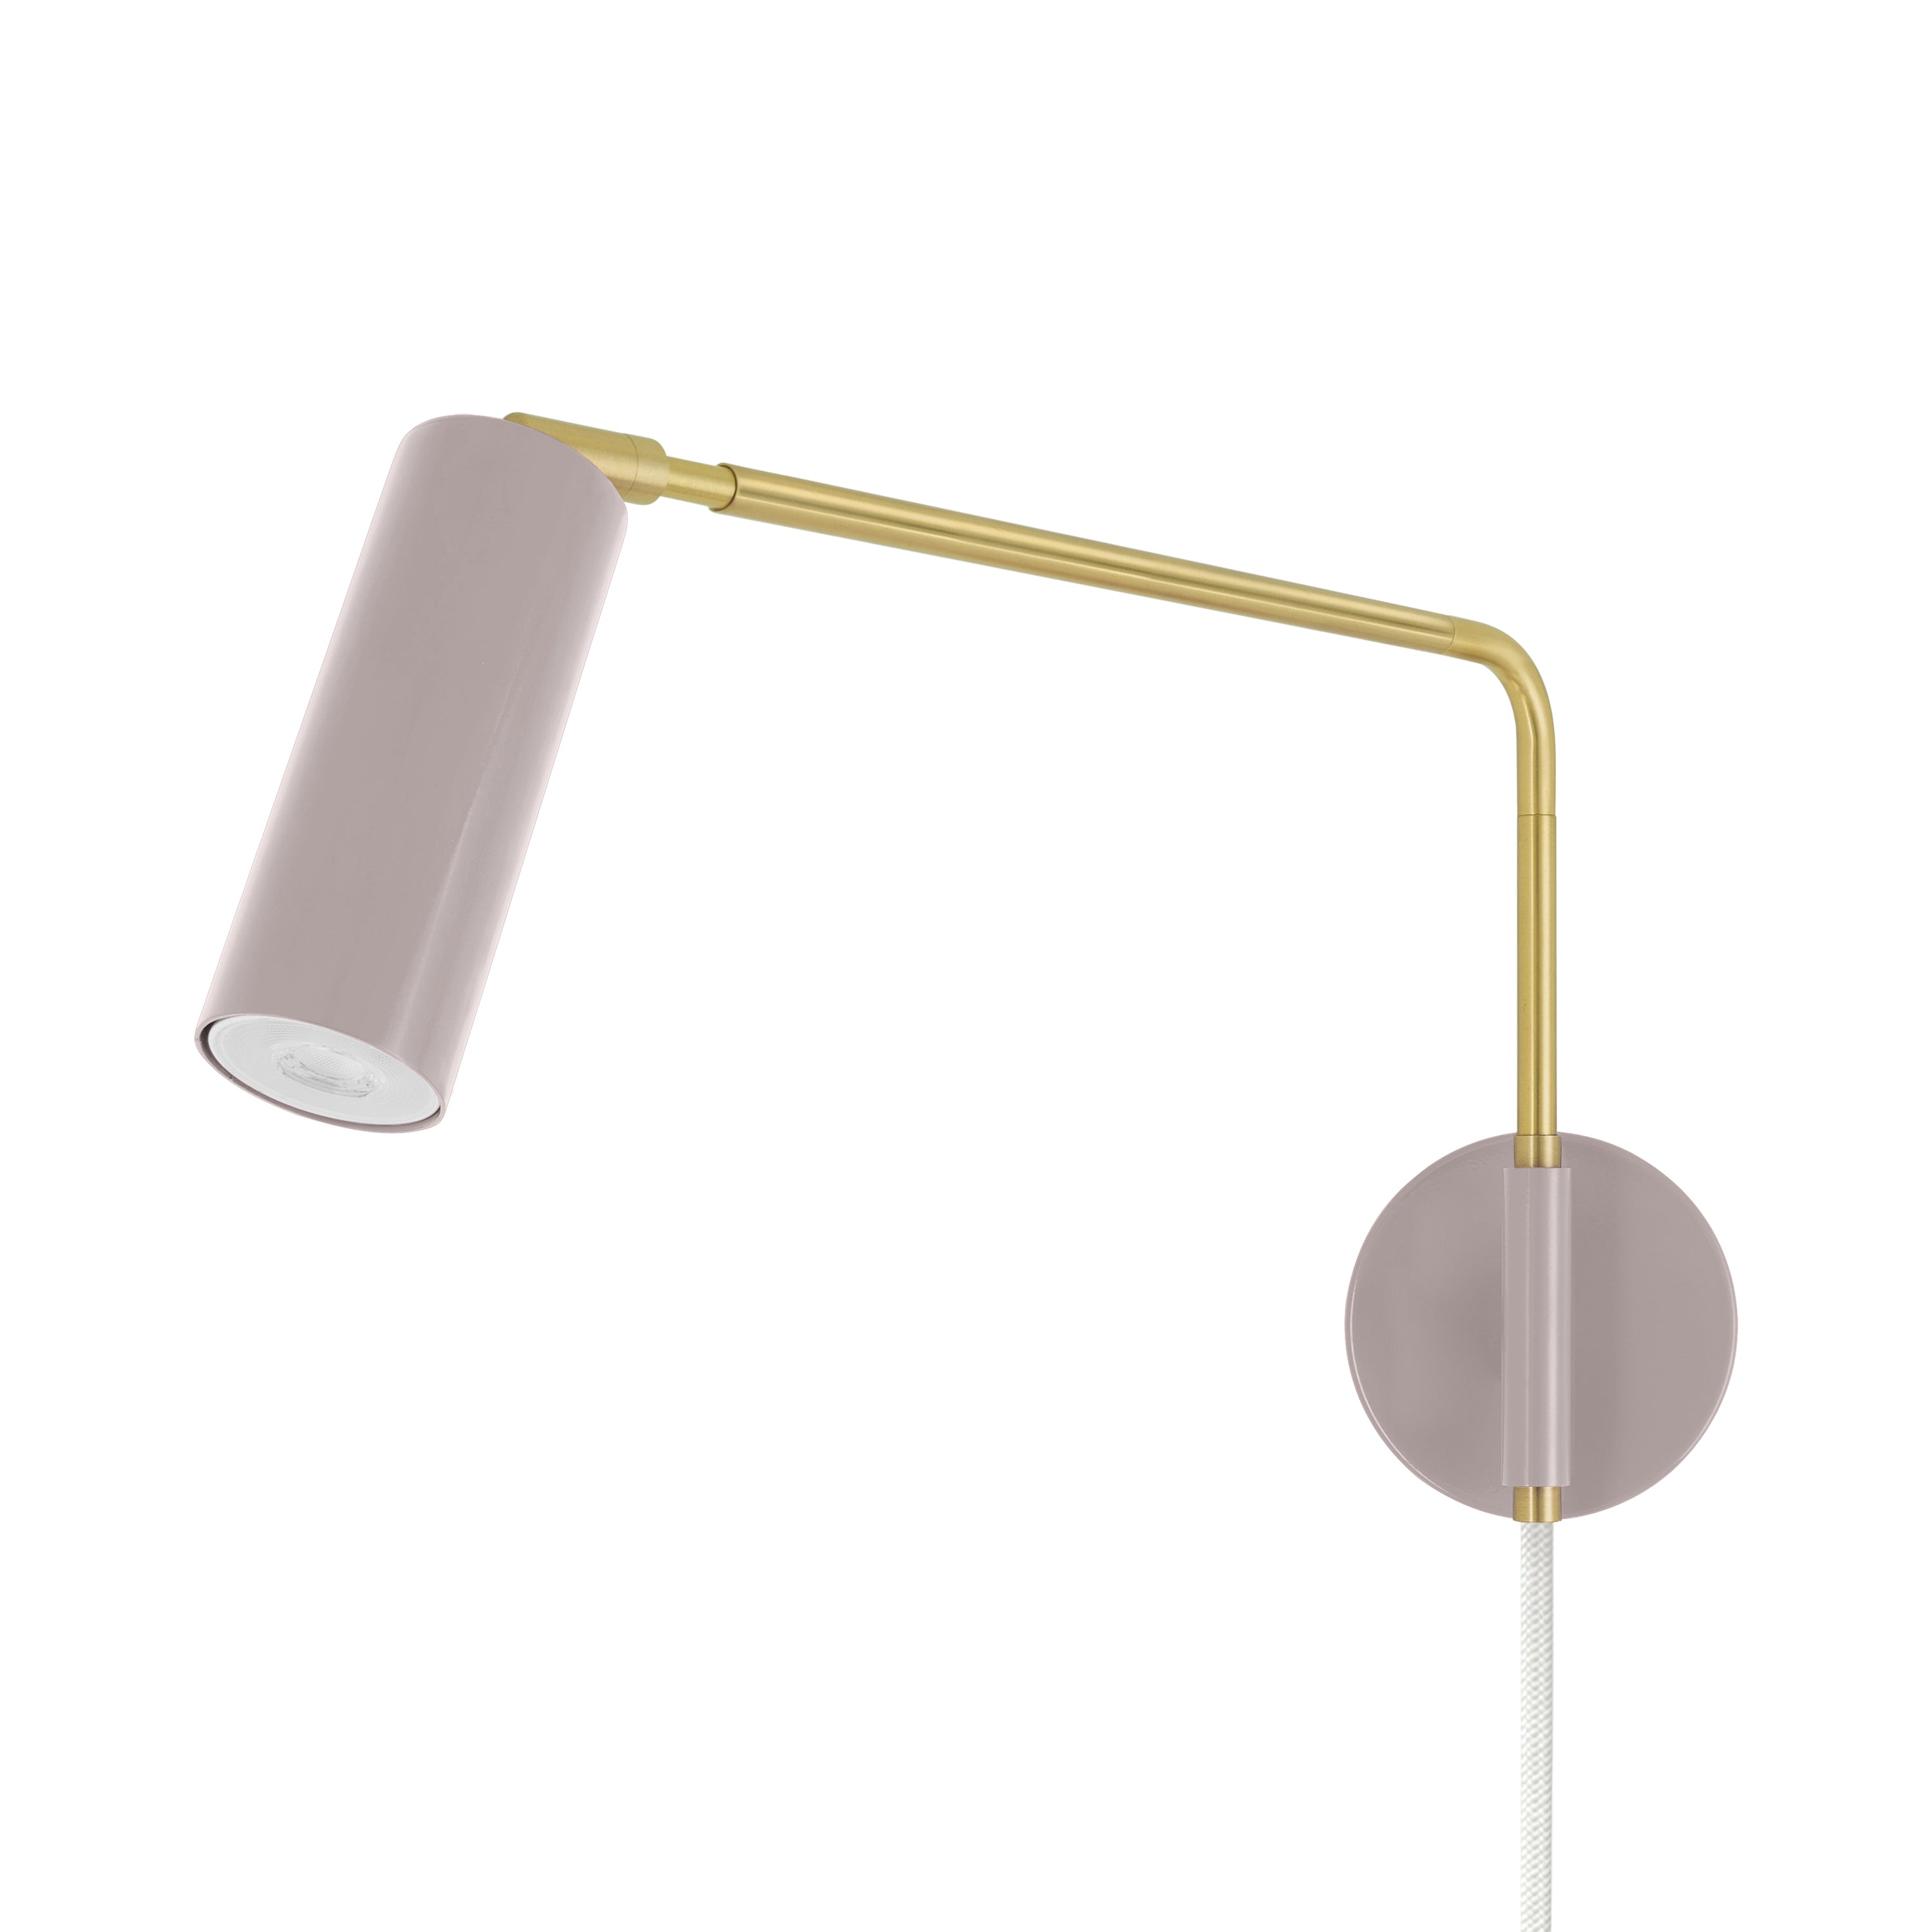 Brass and barely color Reader Swing Arm plug-in sconce Dutton Brown lighting